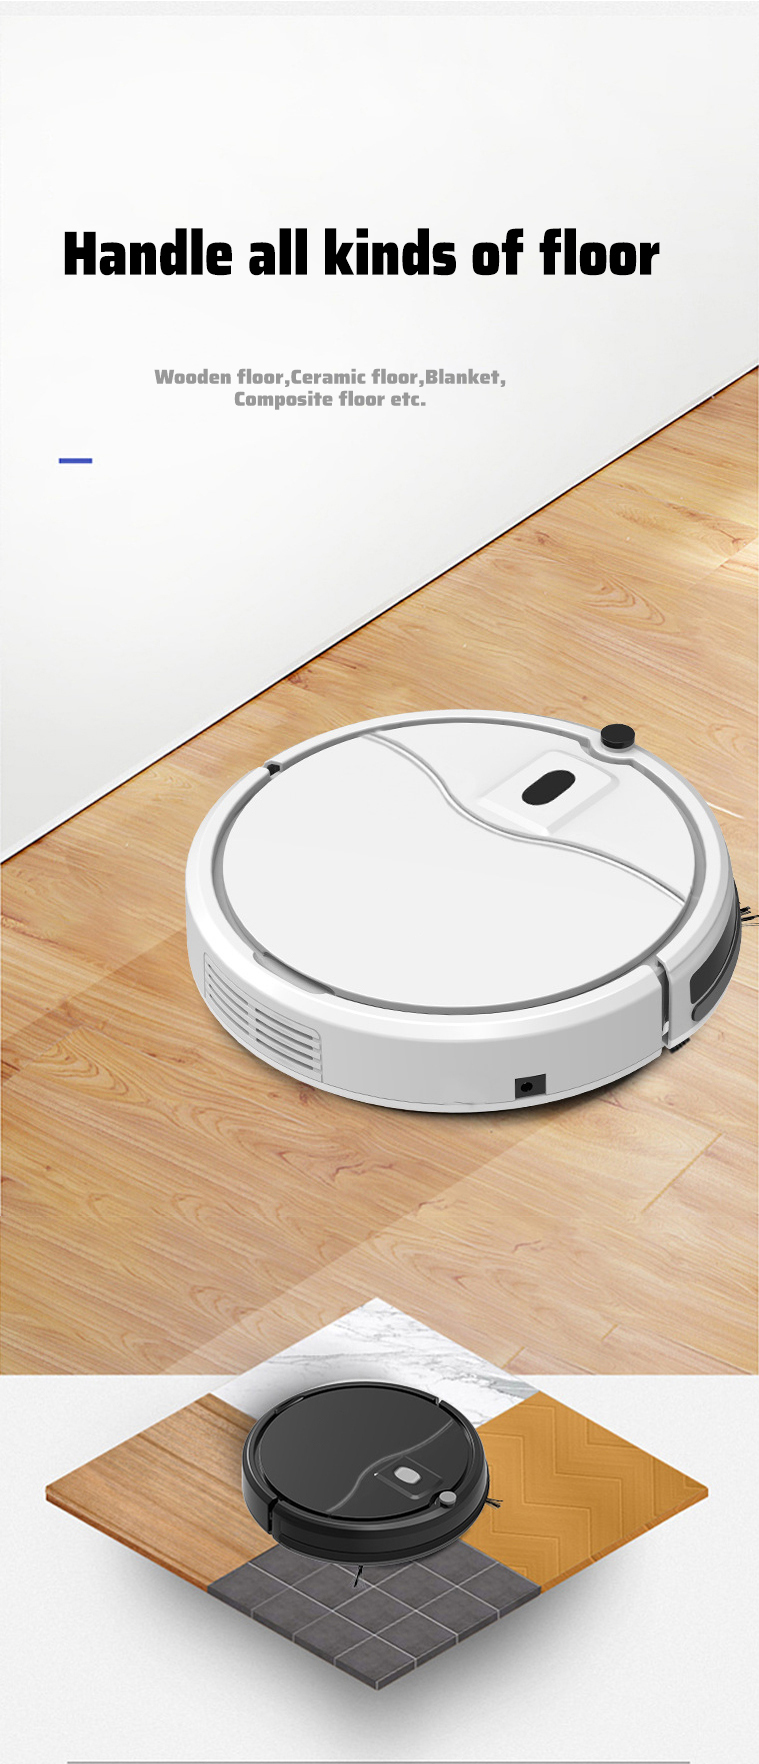 ZODA-805 Intelligent Robot Cleaner 2 in 1/Suction and Sweep